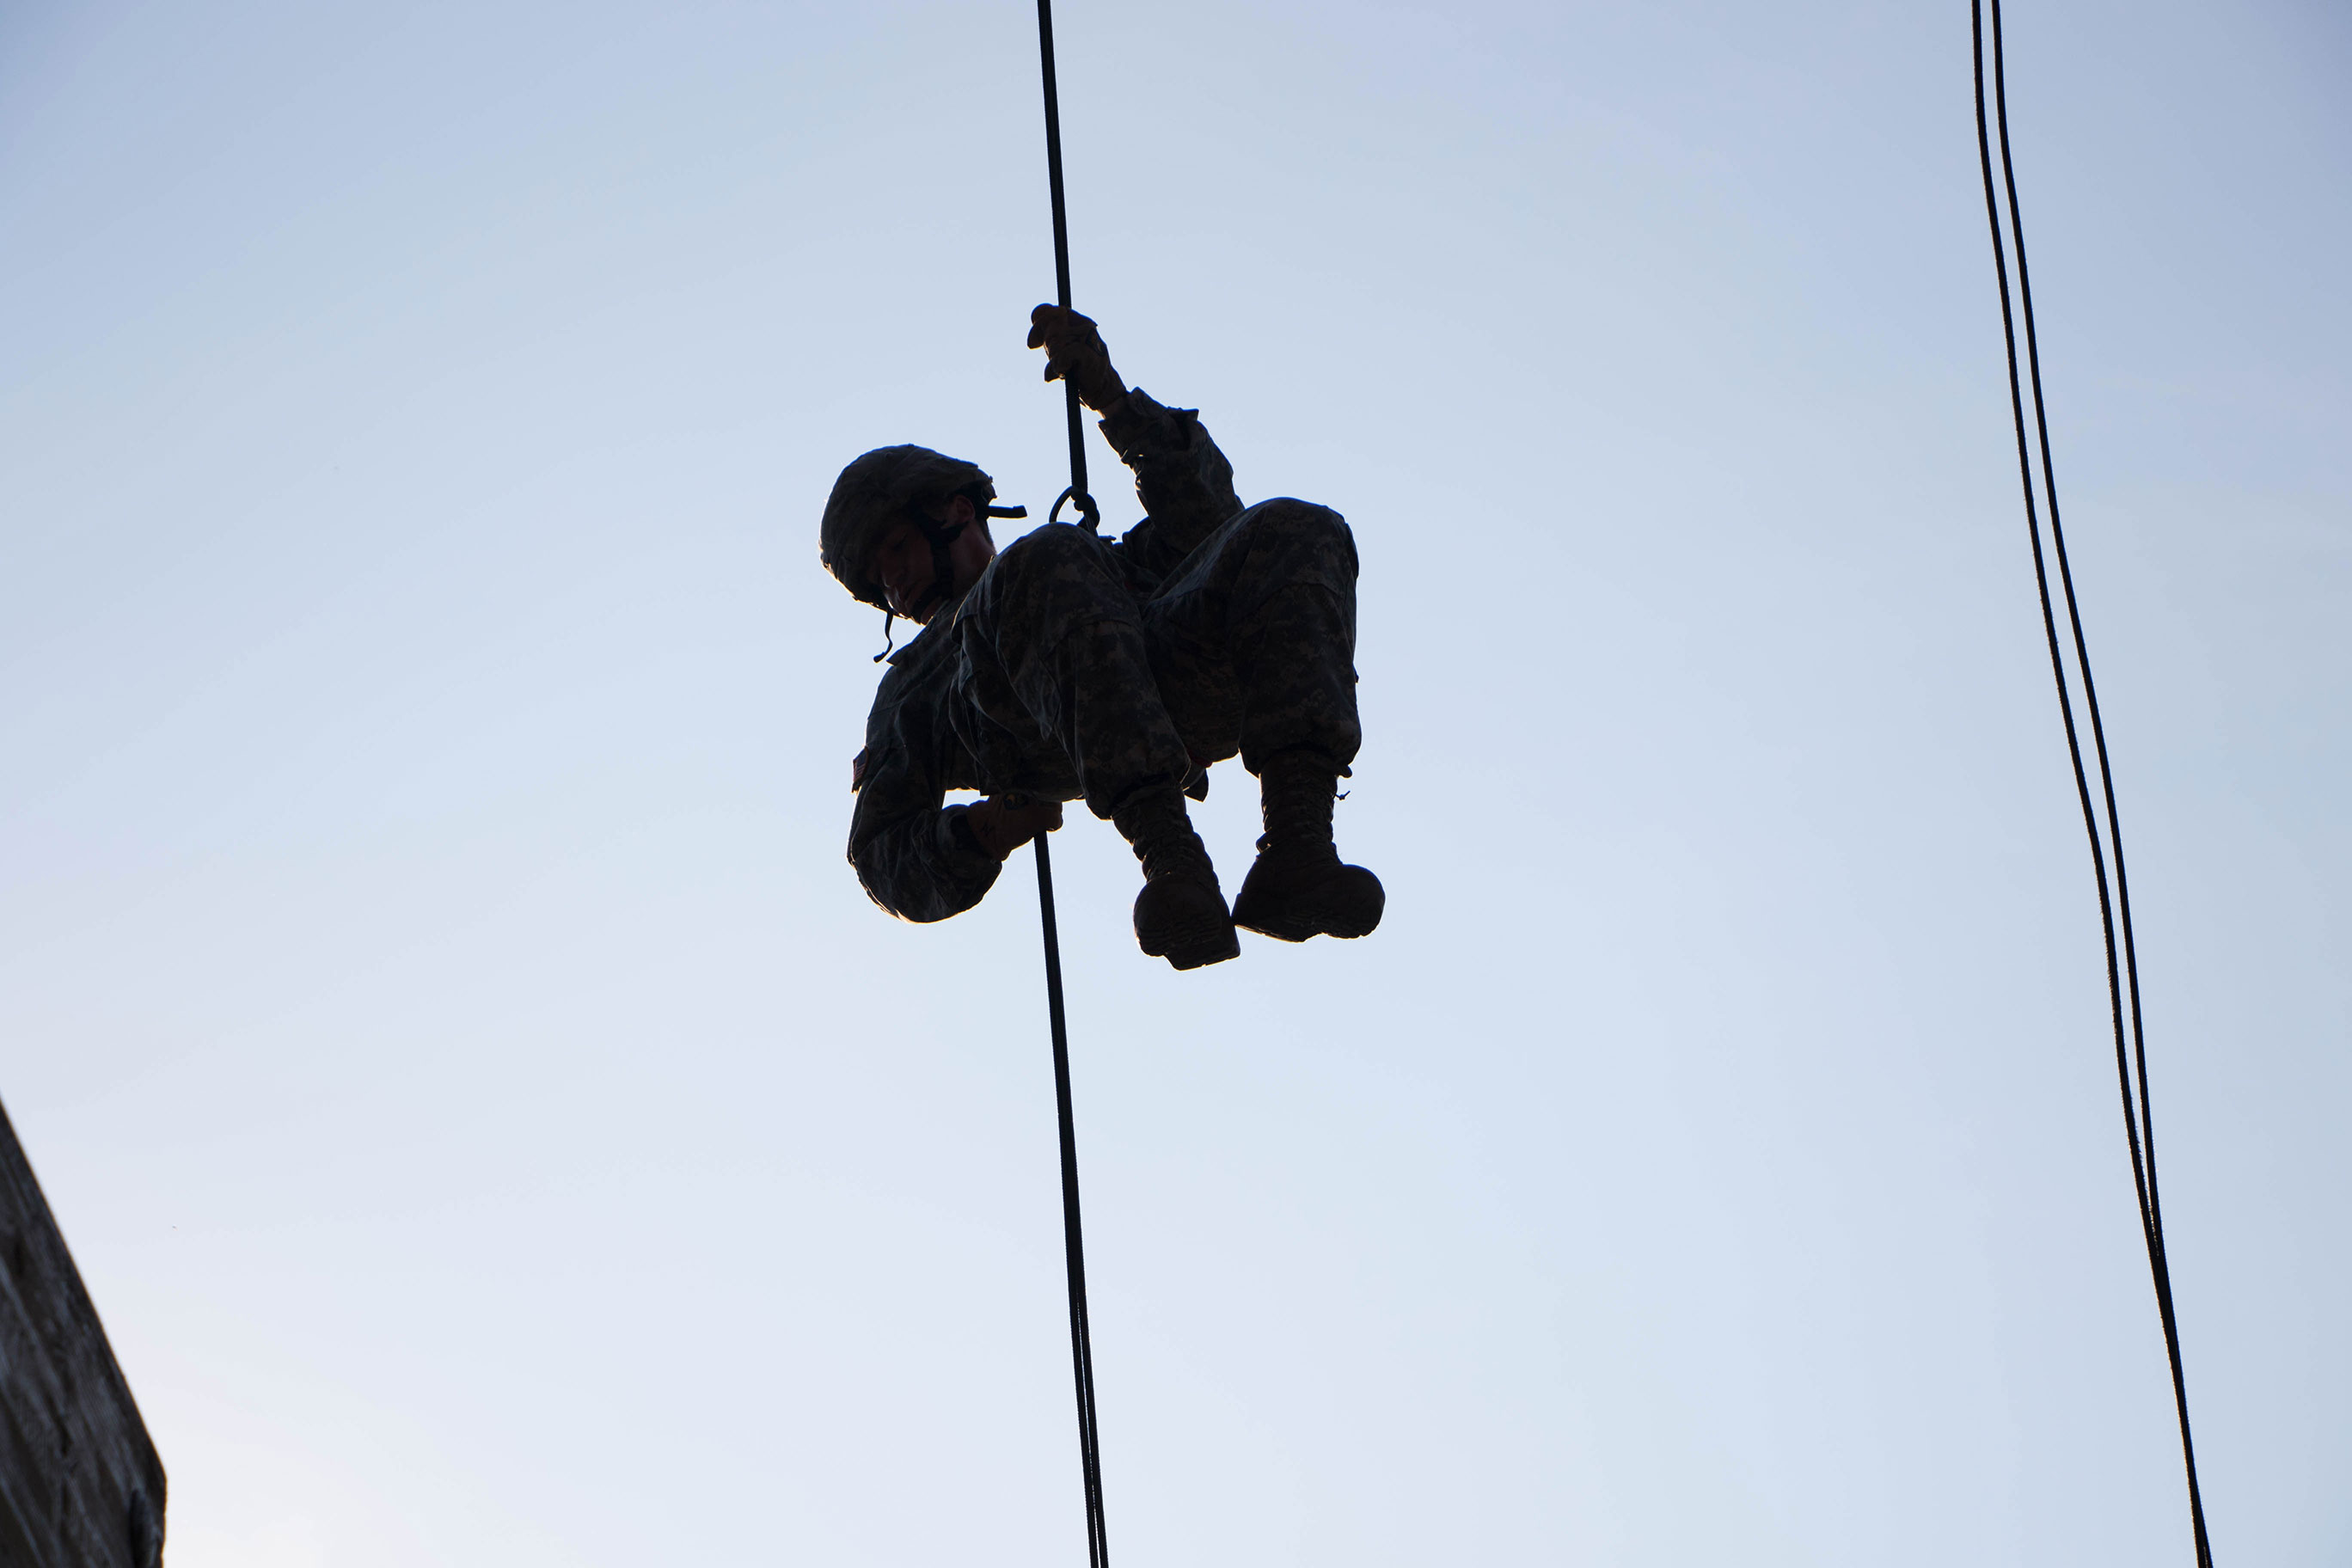 Rappelling into confidence